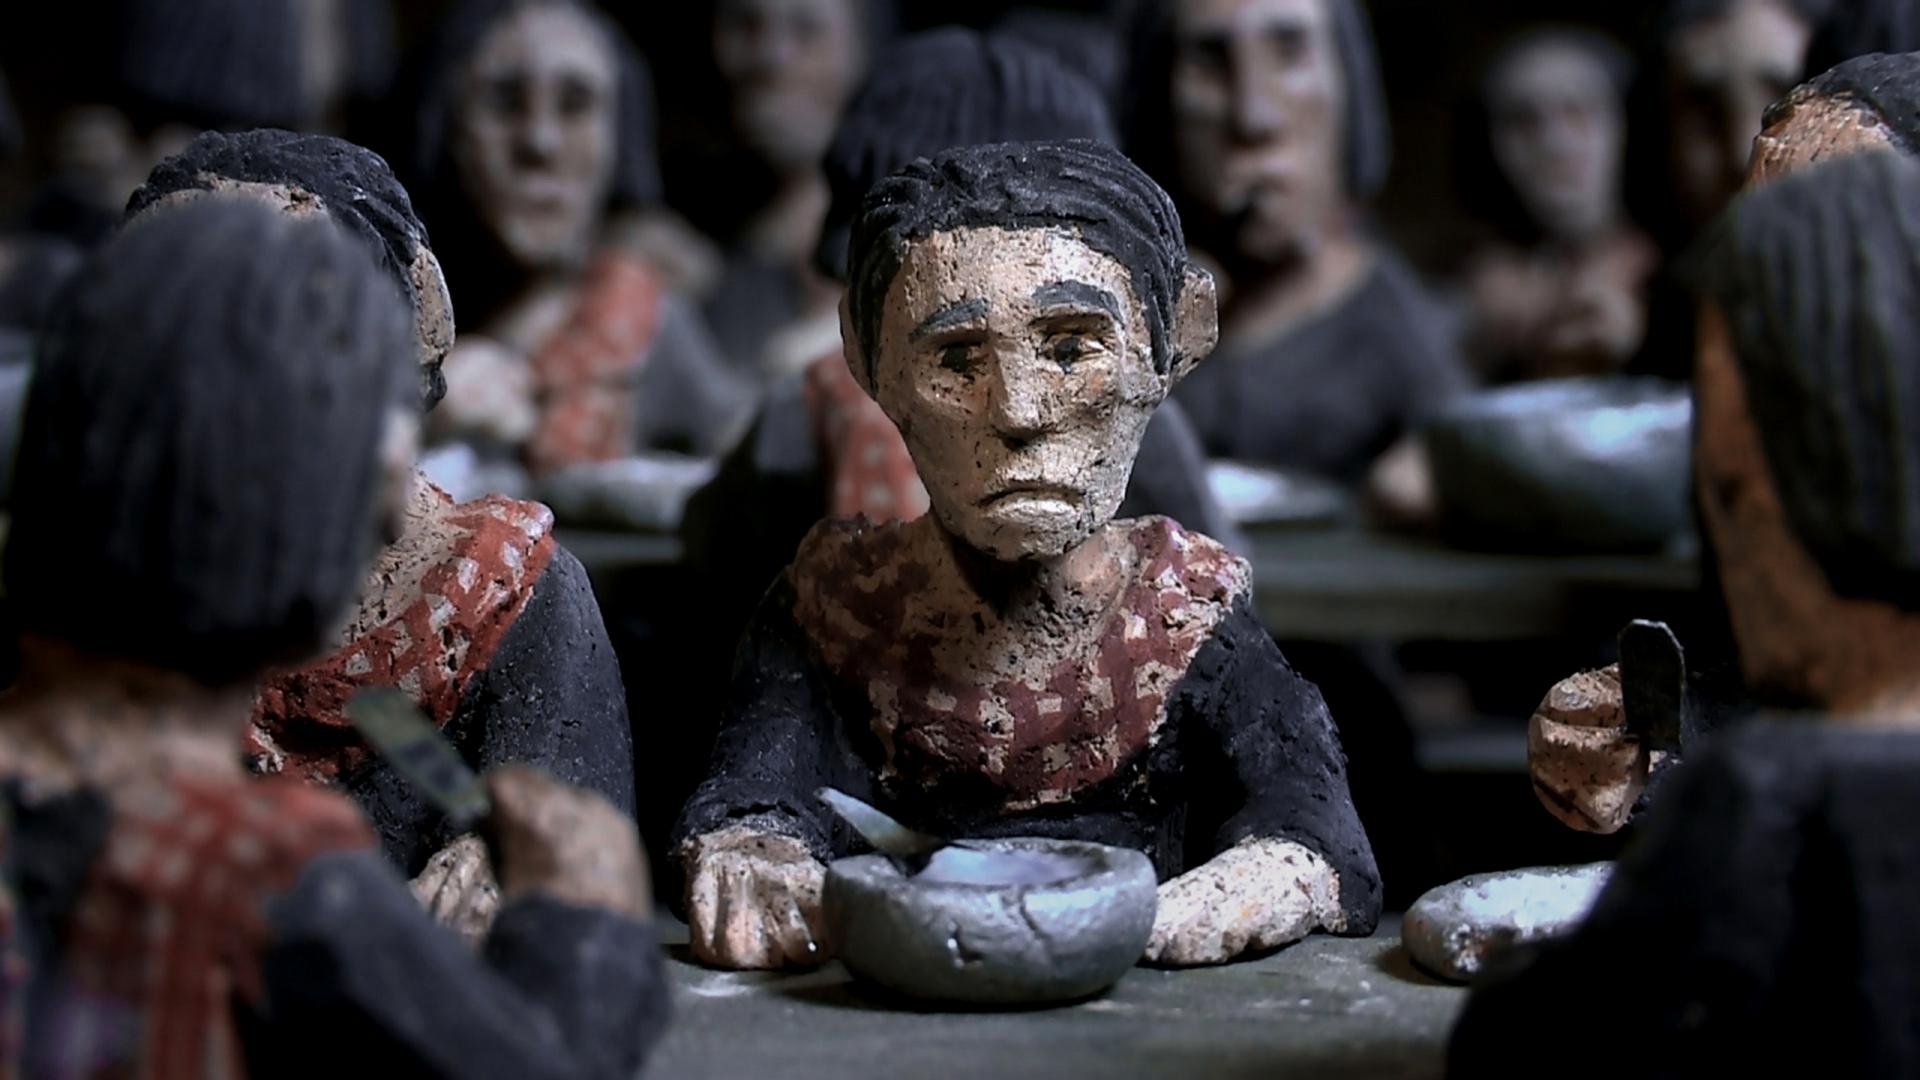 Director Rithy Panh uses clay figurines to represent Cambodians in his Oscar-nominated film memoir "The Missing Picture". It's about his boyhood memories of living under the Khmer Rouge from 1974 to 1978. Panh lost almost every member of his immediate and